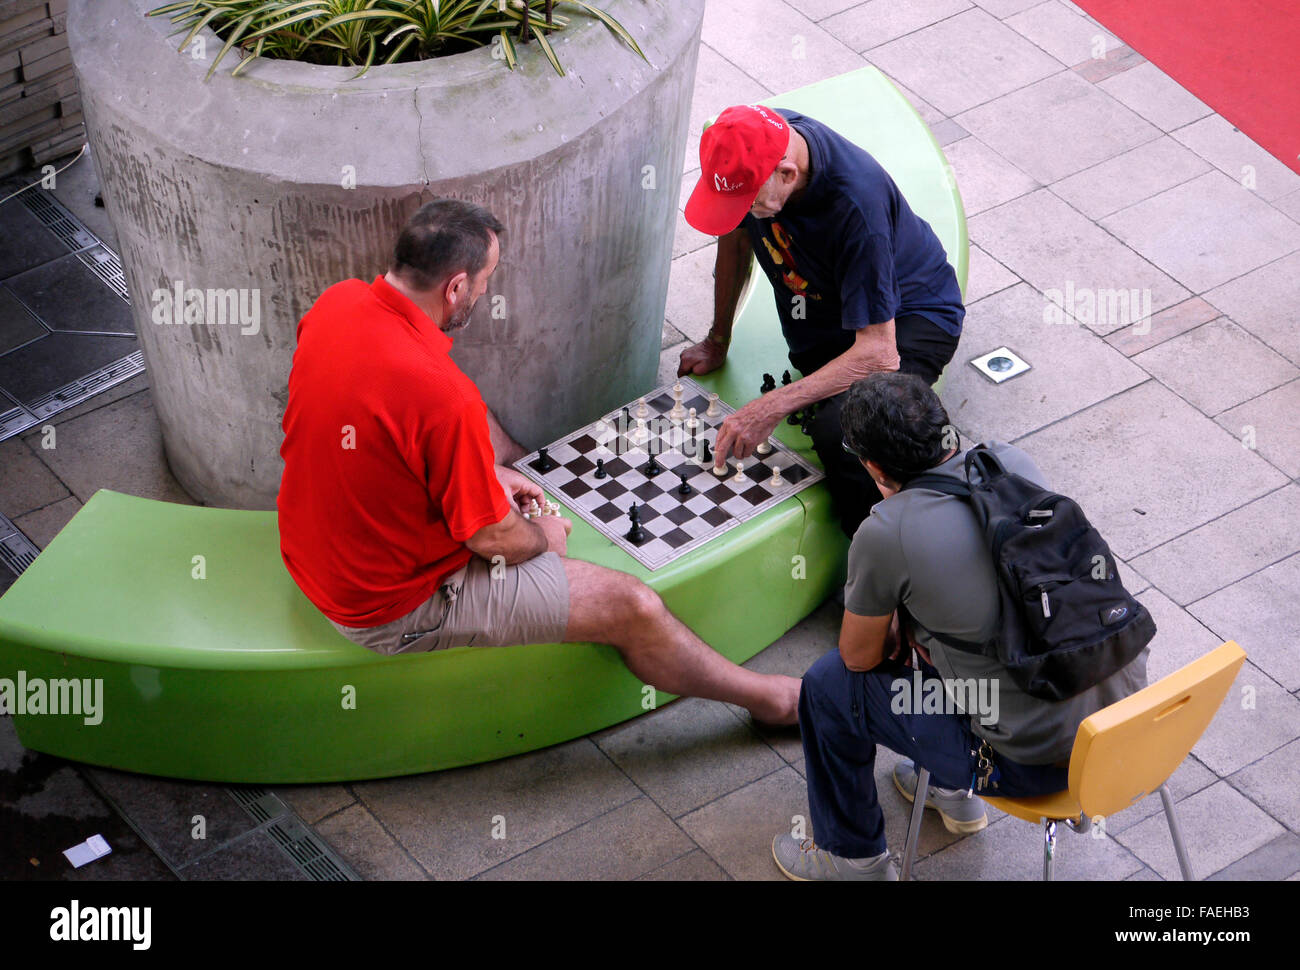 Two males having a game of chess which is being played outdoors in a public space Stock Photo